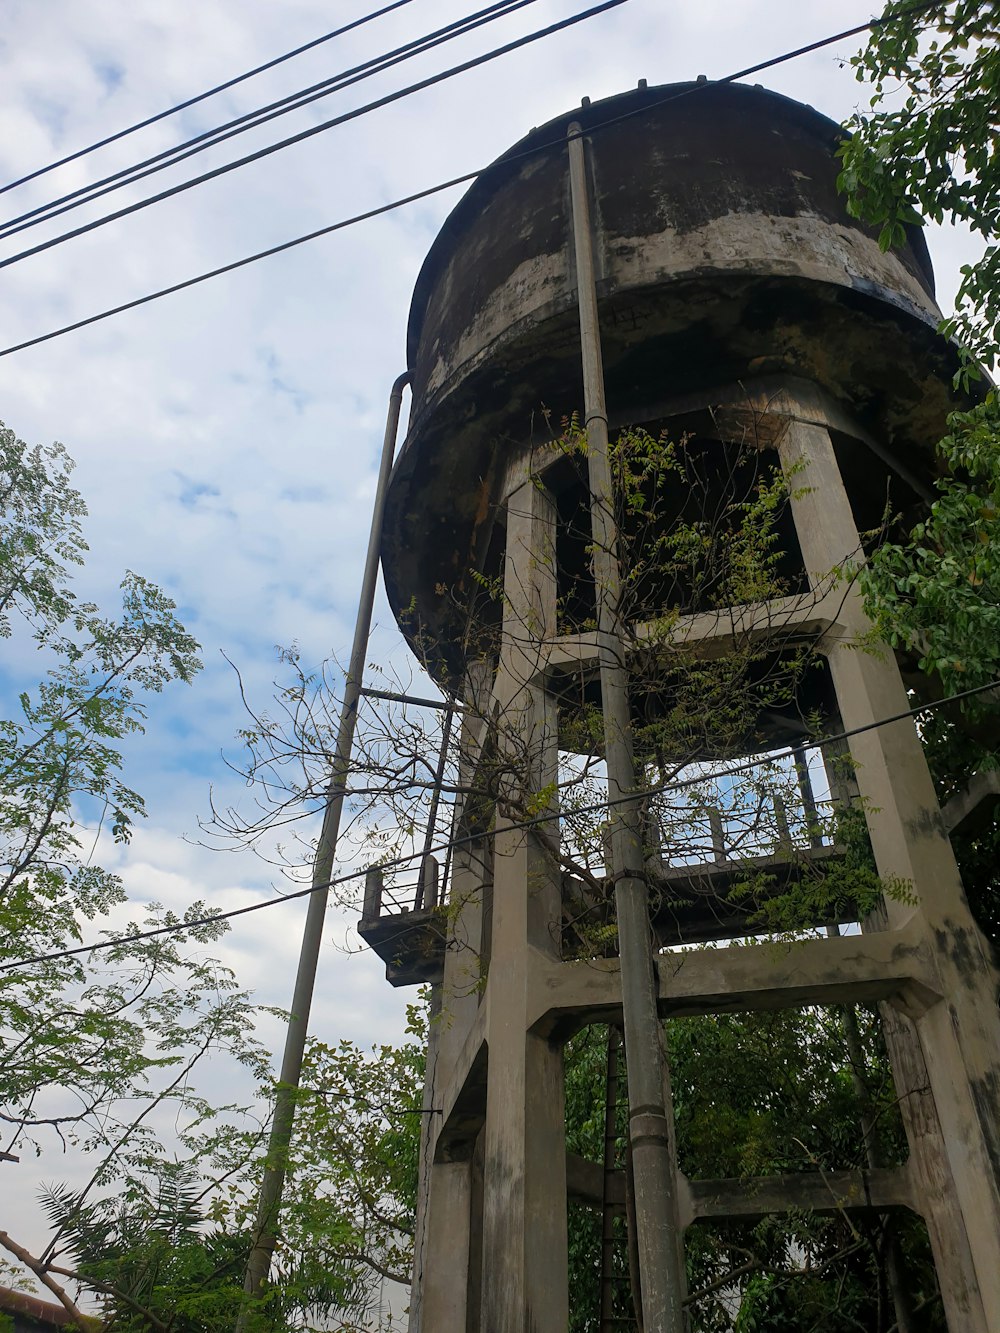 an old water tower with vines growing out of it